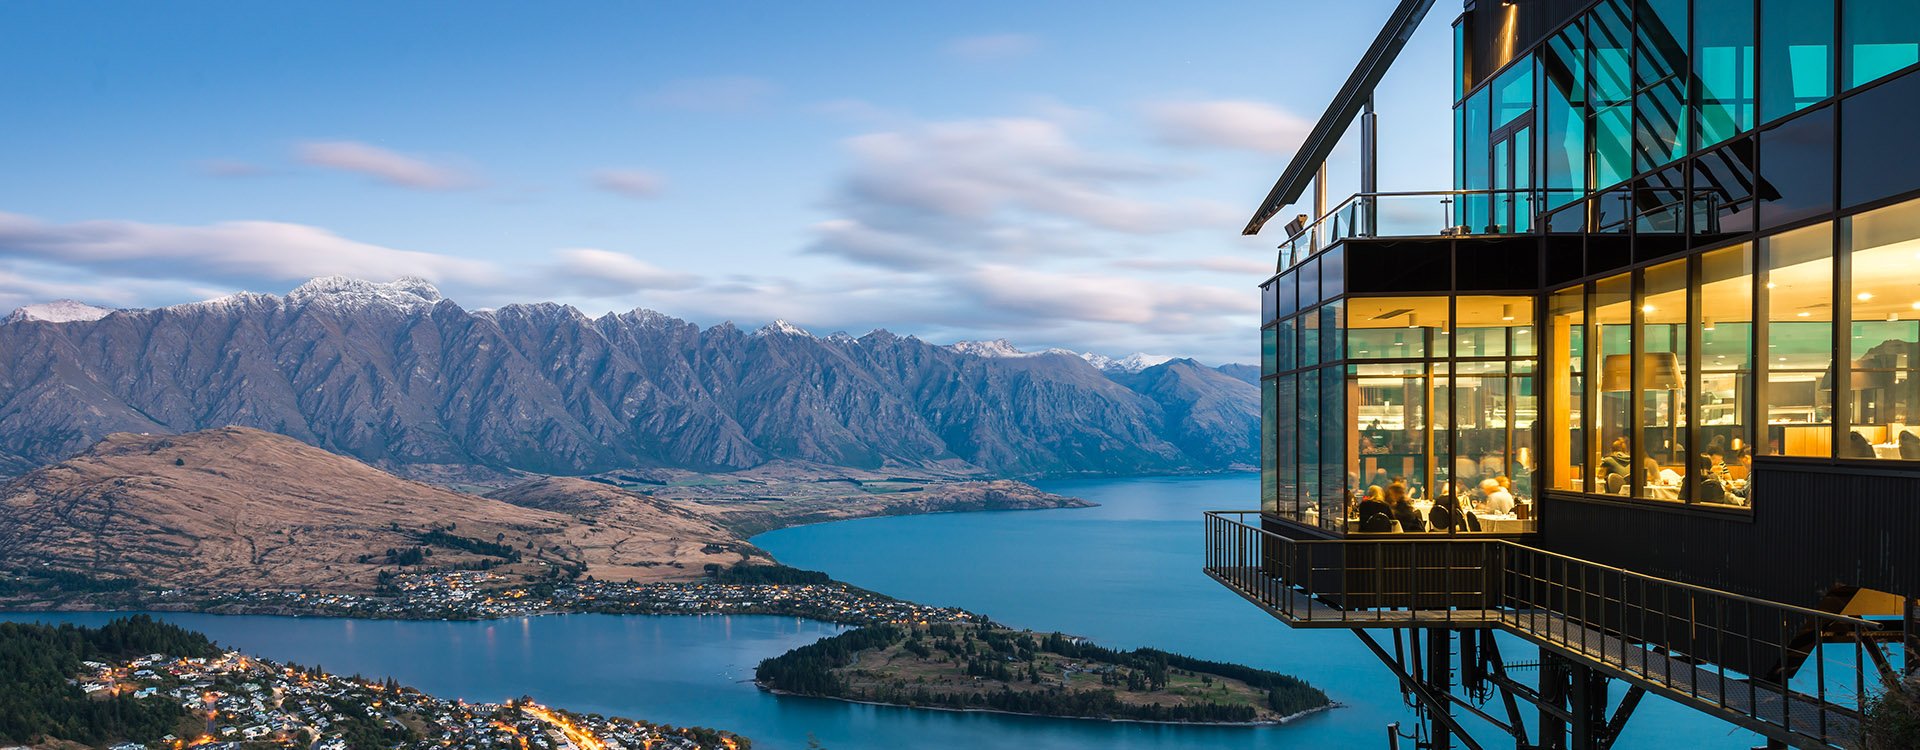 New Zealand mountains and dining concept over looking Queenstown